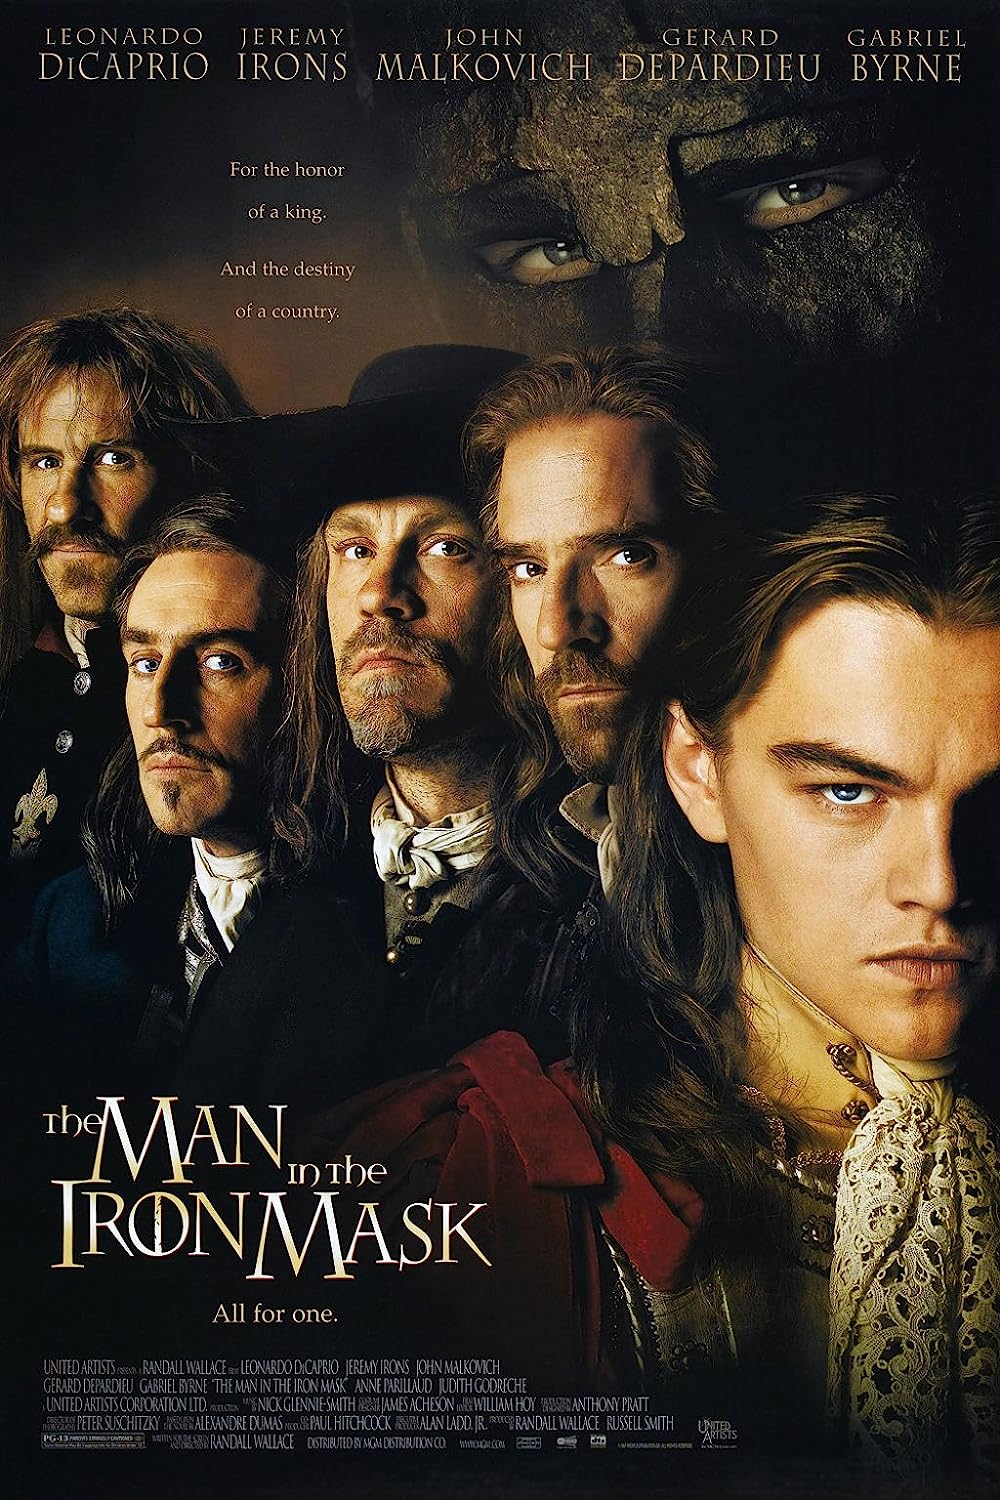 FULL MOVIE: The Man In The Iron Mask (1998) [Action]